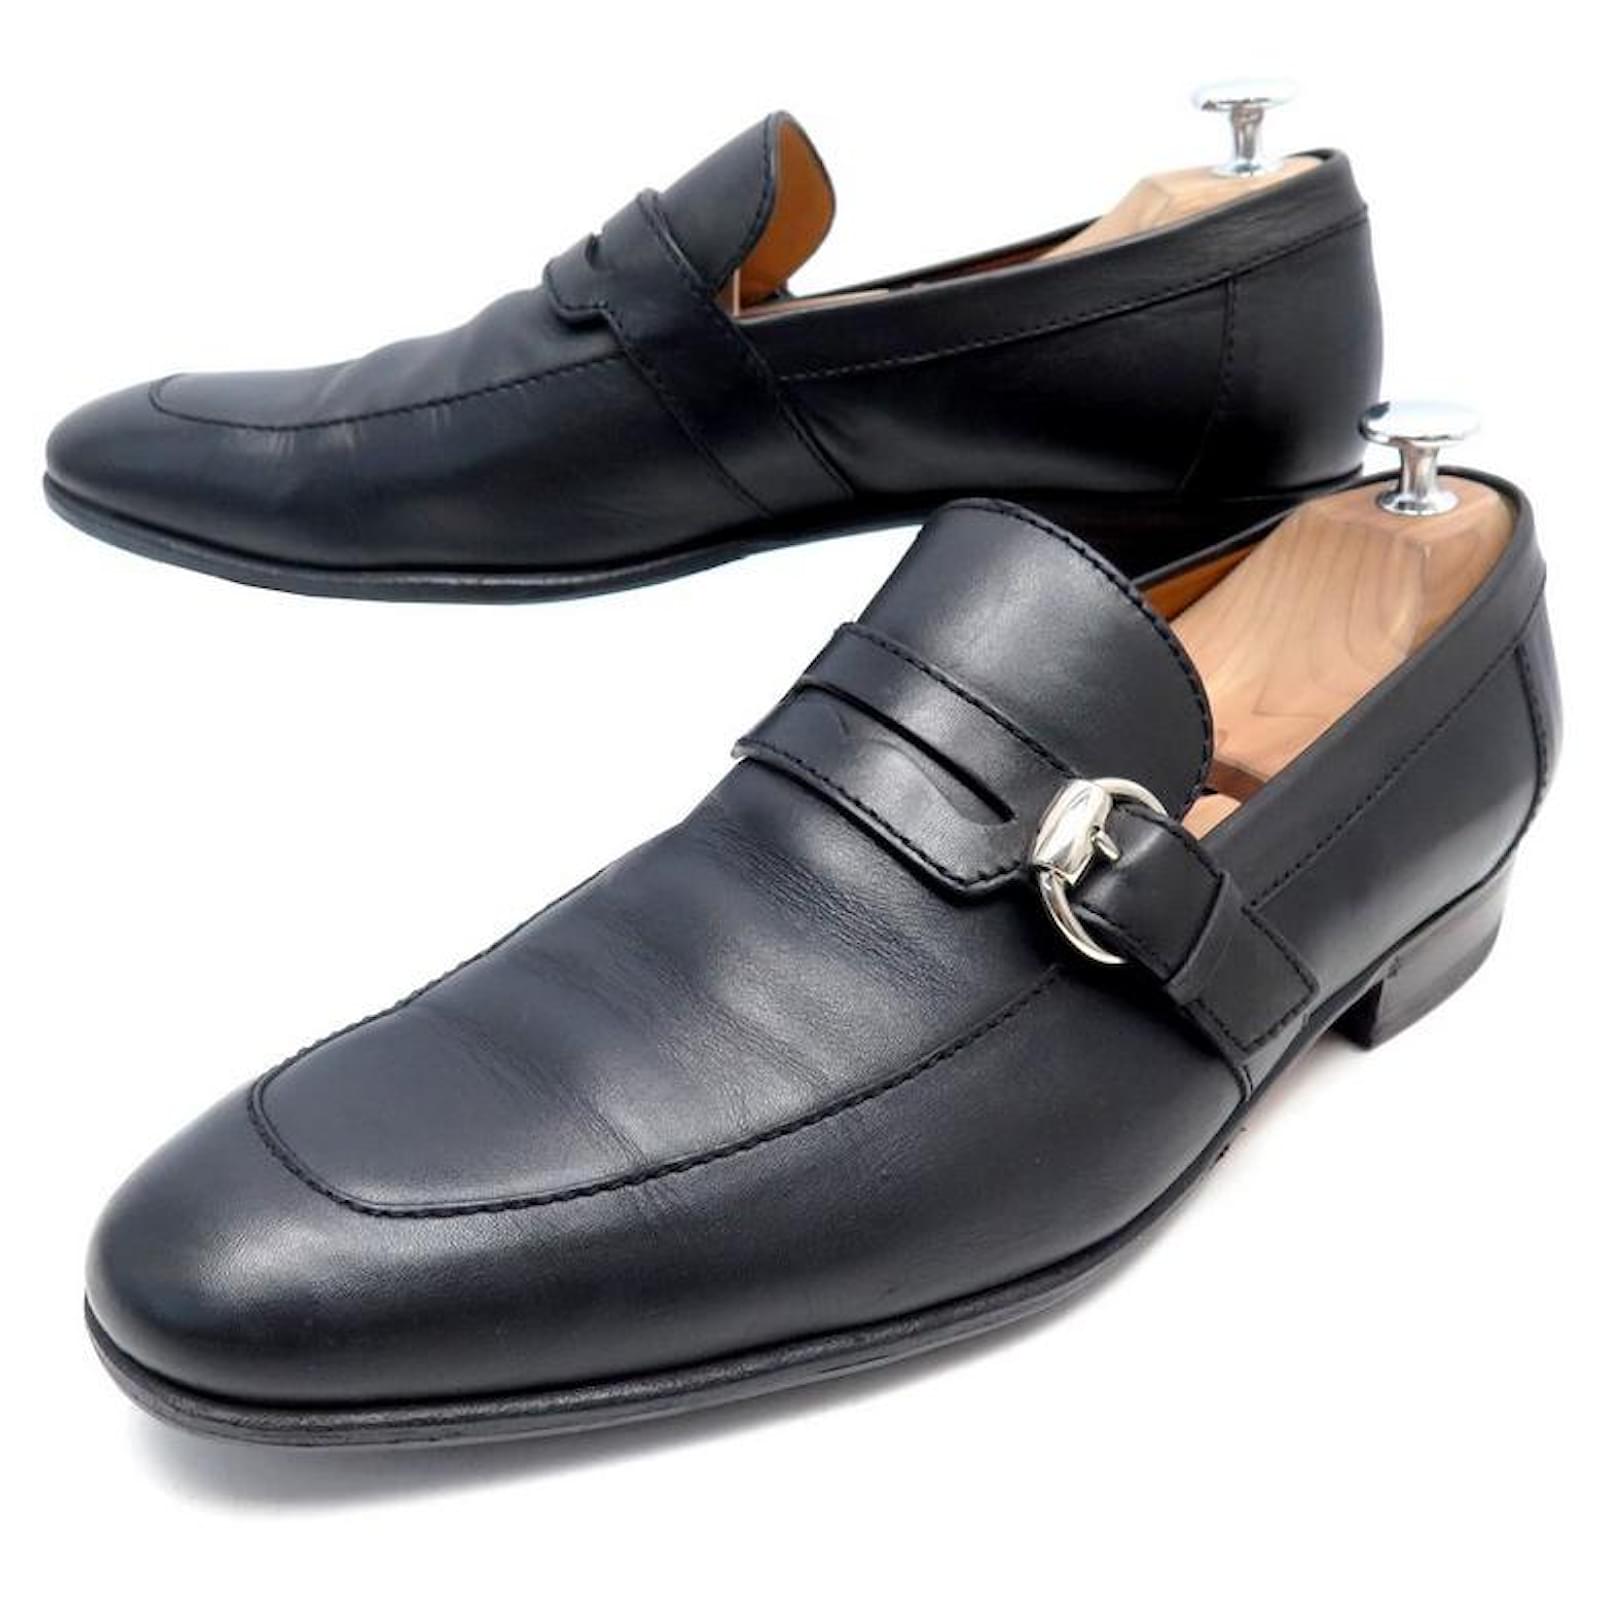 GUCCI SHOES LOAFERS WITH BUCKLE 181812 Black Leather 41E LEATHER SHOES  ref.549825 - Joli Closet